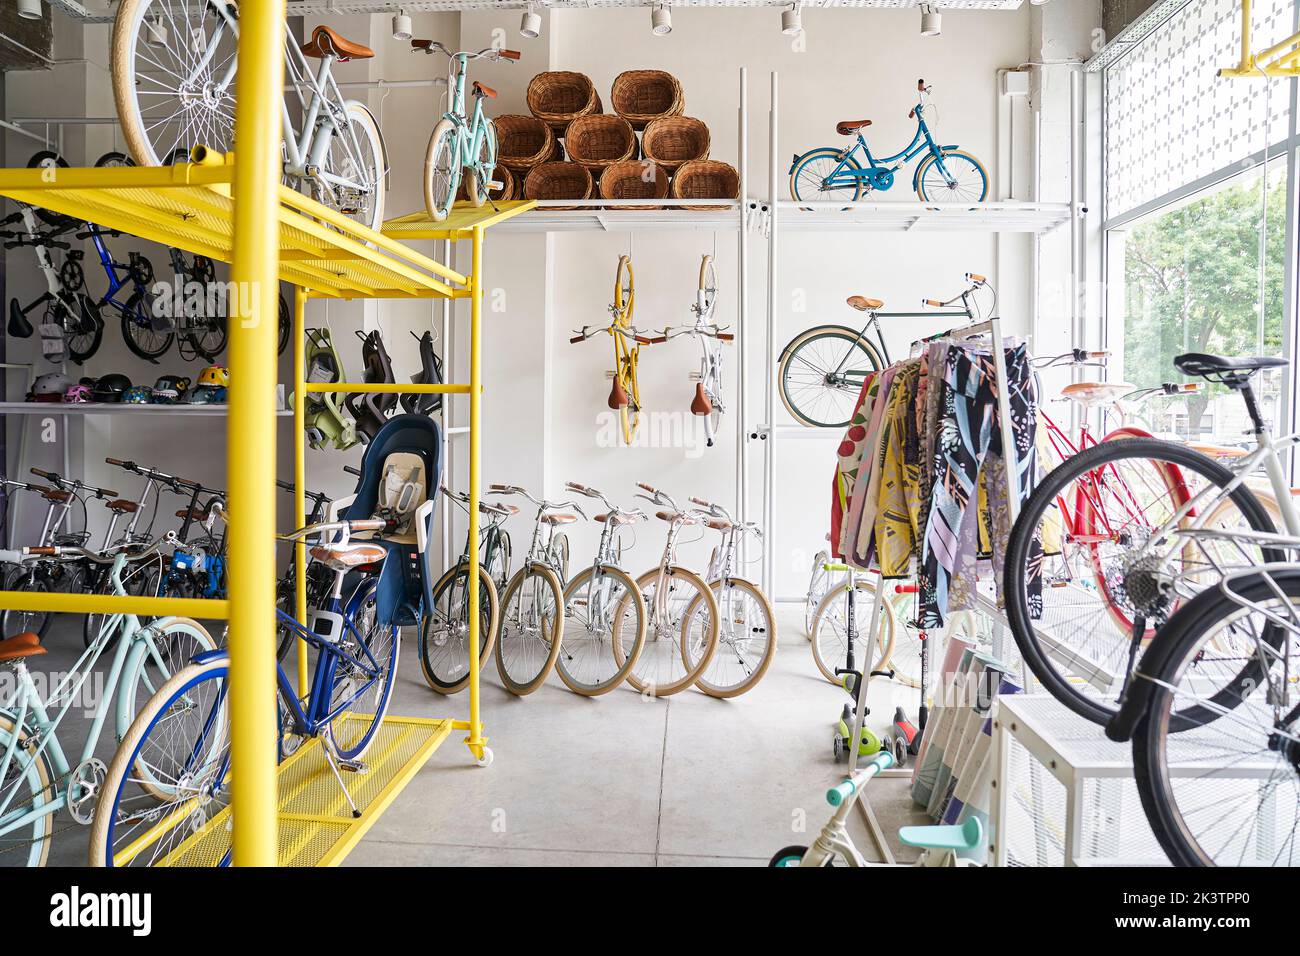 General view of small neighborhood bicycle shop Stock Photo